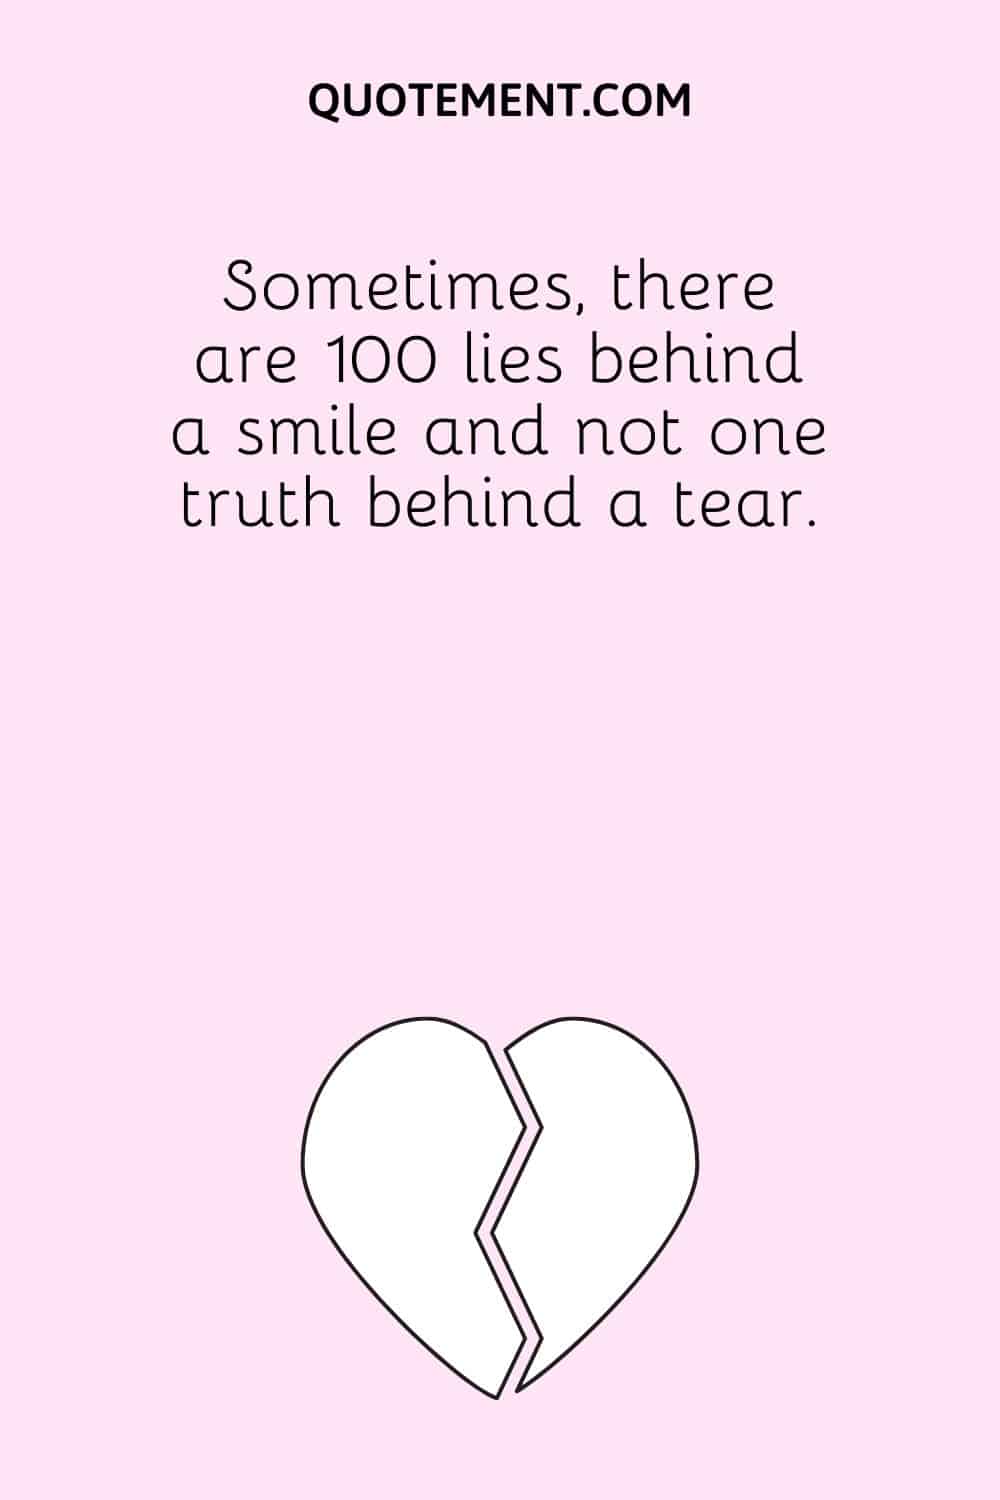 Sometimes, there are 100 lies behind a smile and not one truth behind a tear.